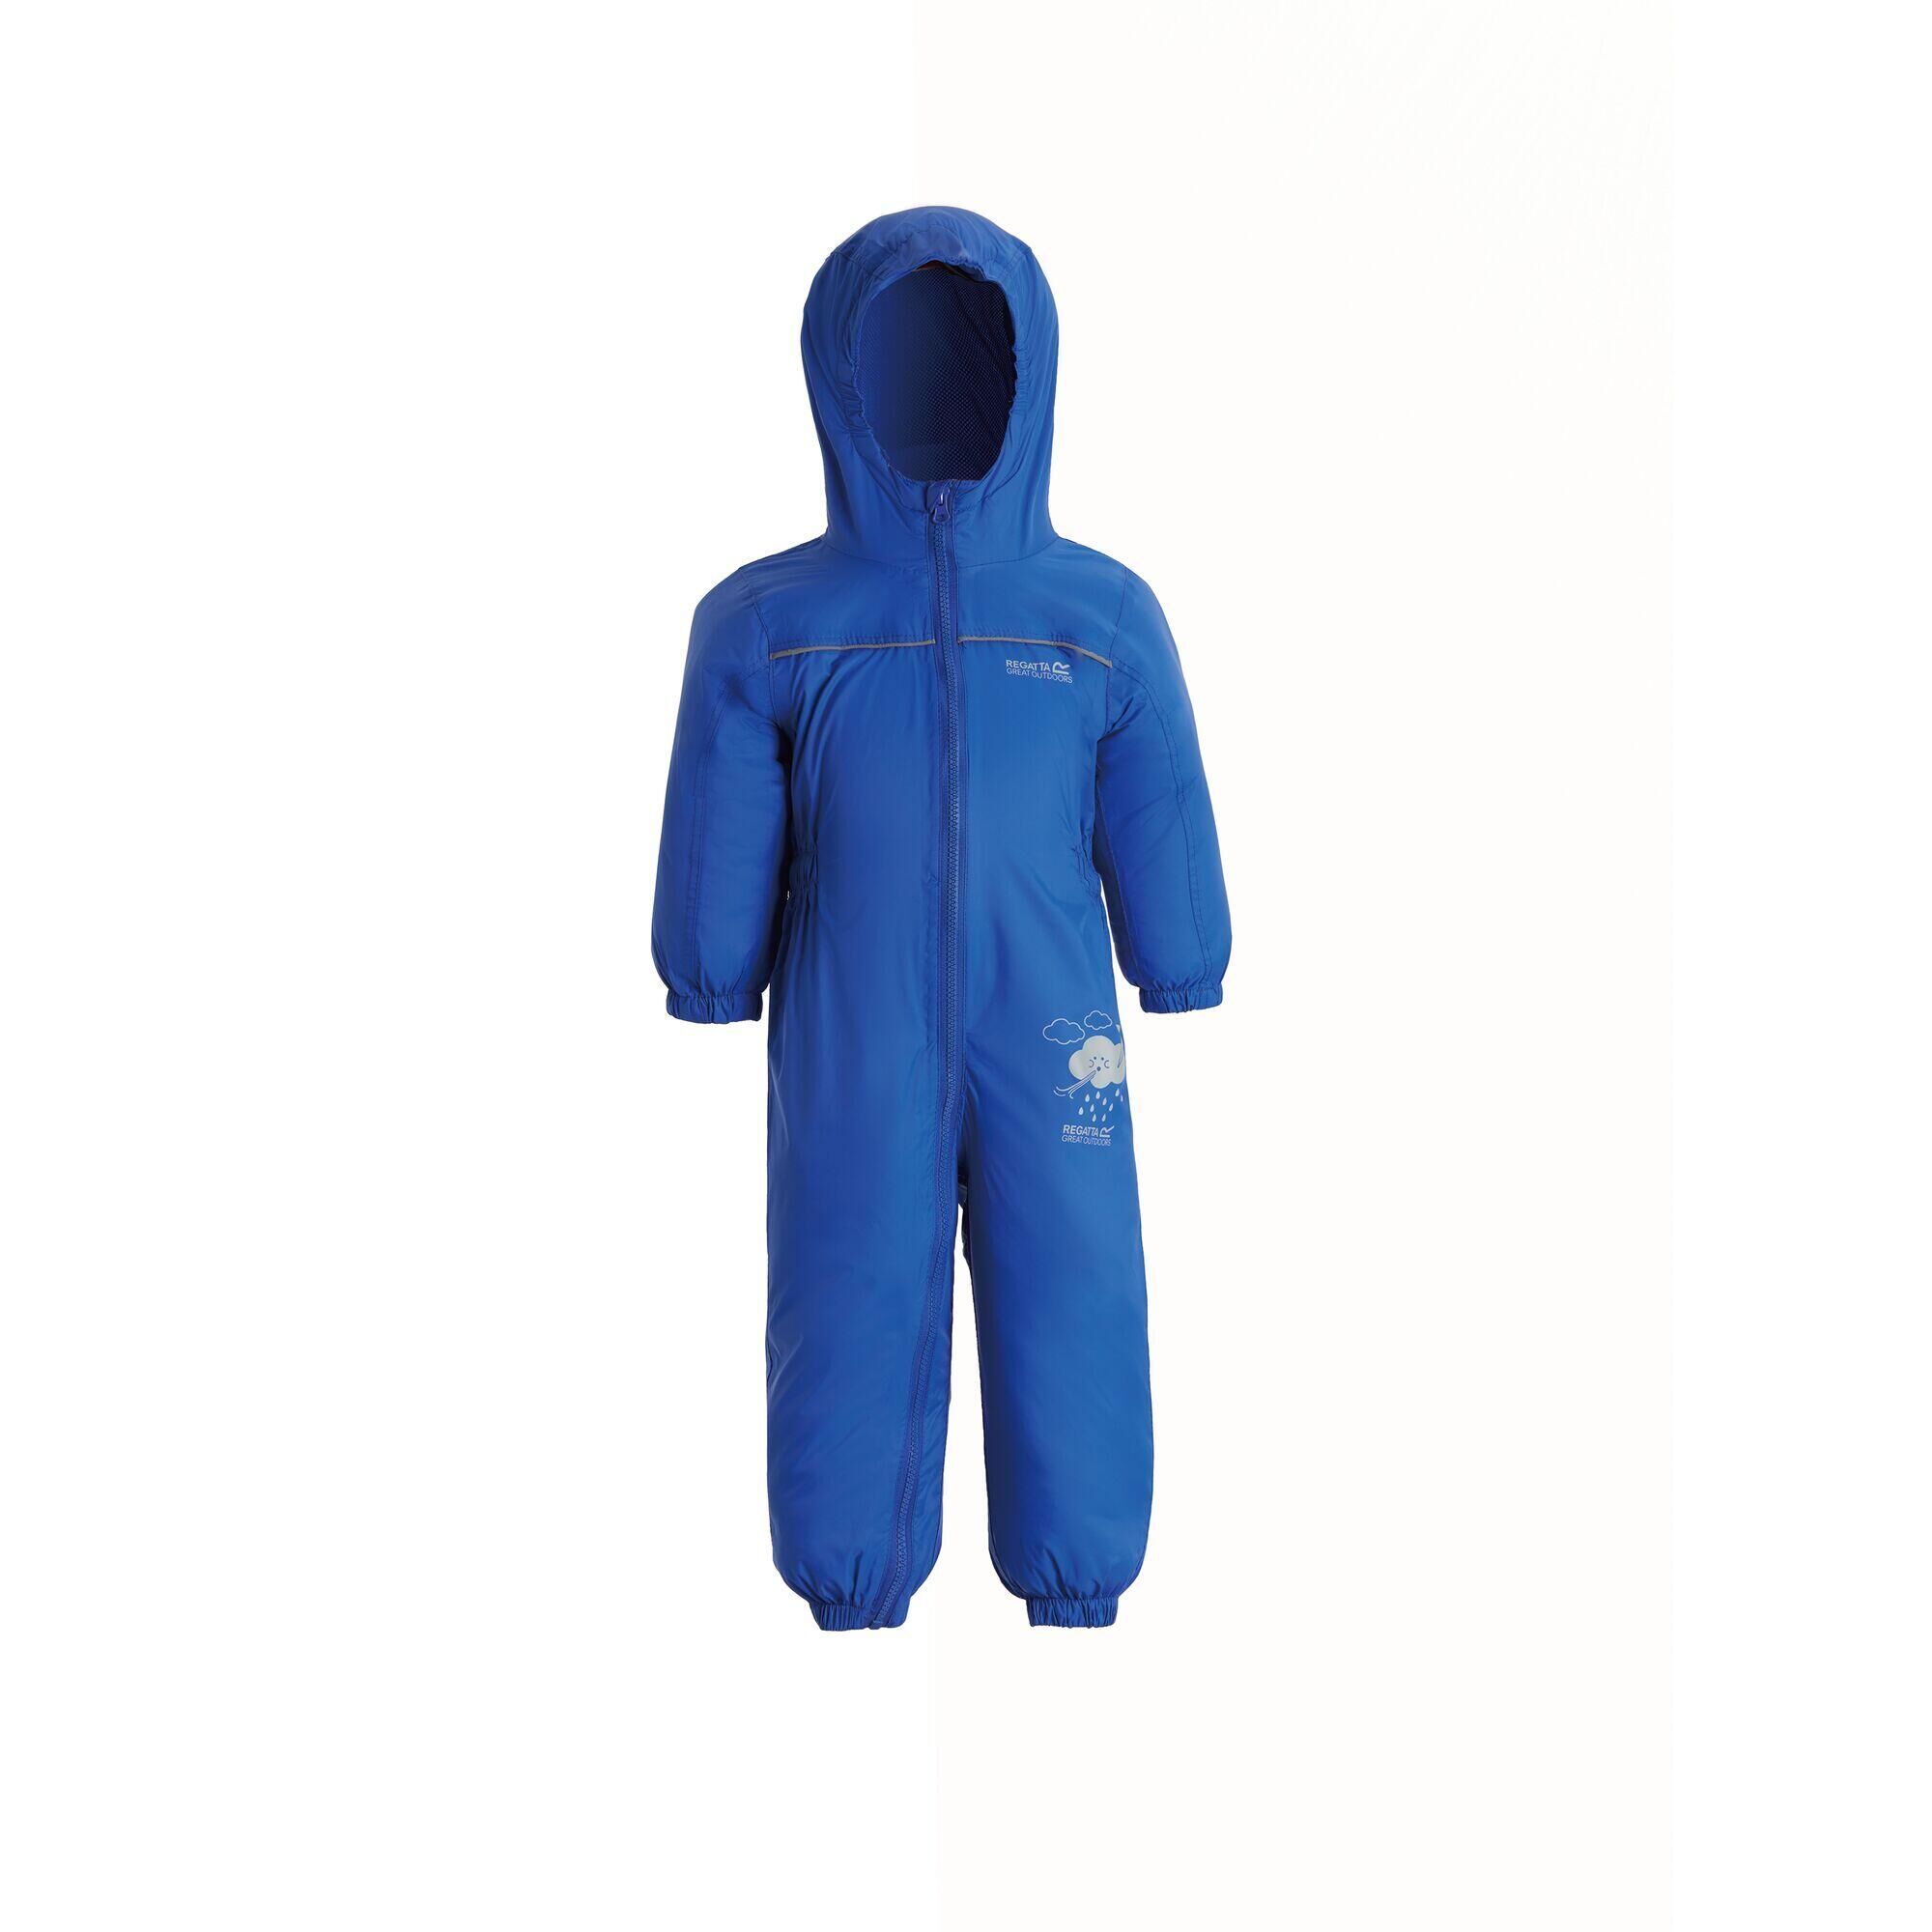 REGATTA Great Outdoors Childrens Toddlers Puddle IV Waterproof Rainsuit (Oxford Blue)